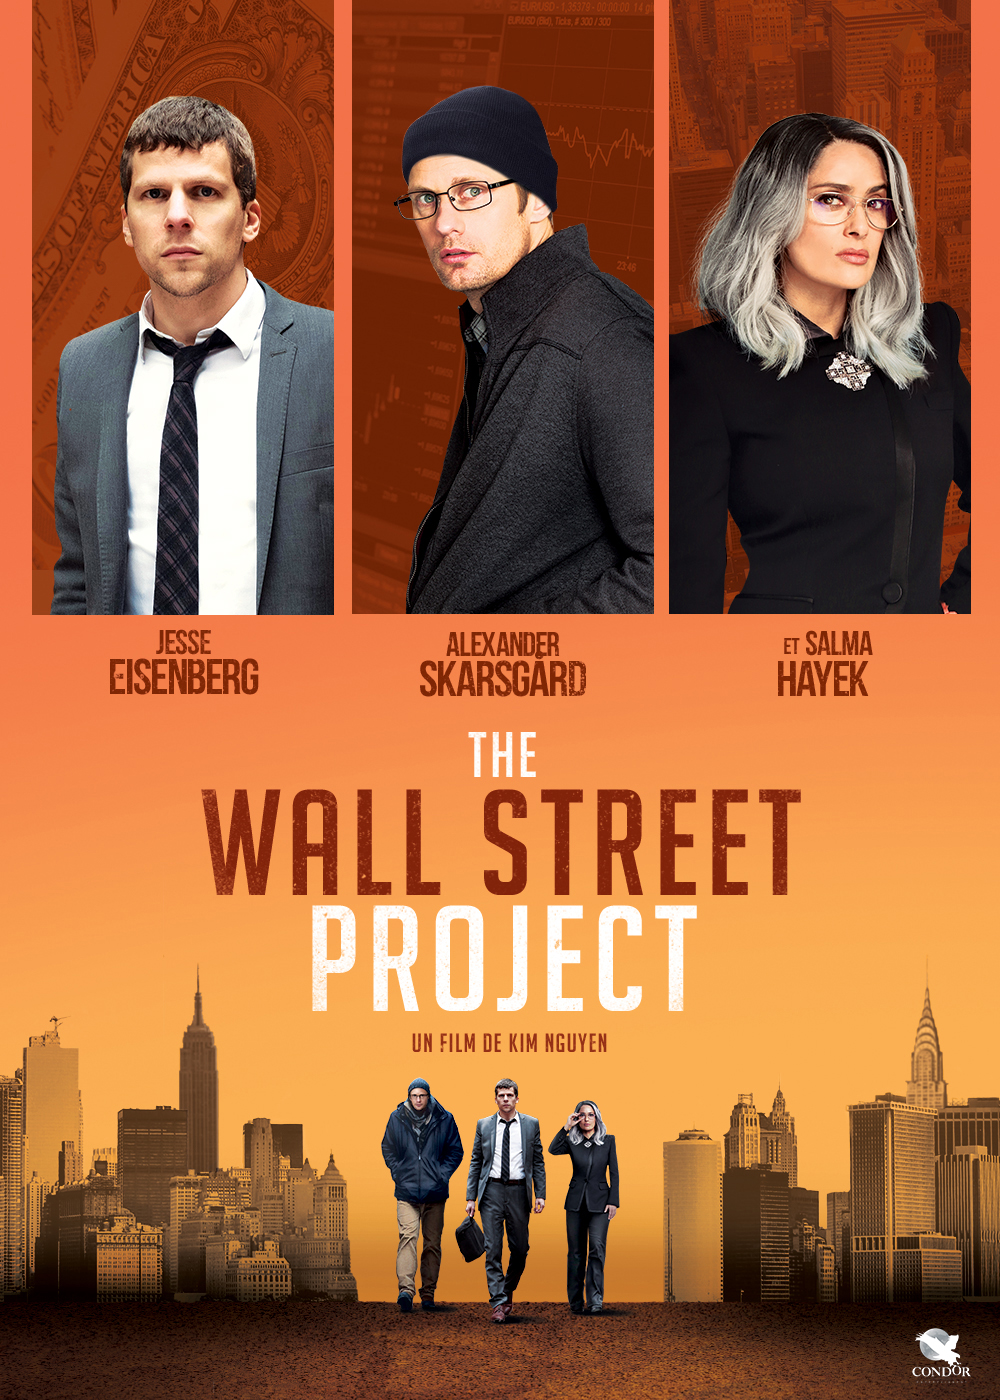 THE WALL STREET PROJECT_Affiche film 2018